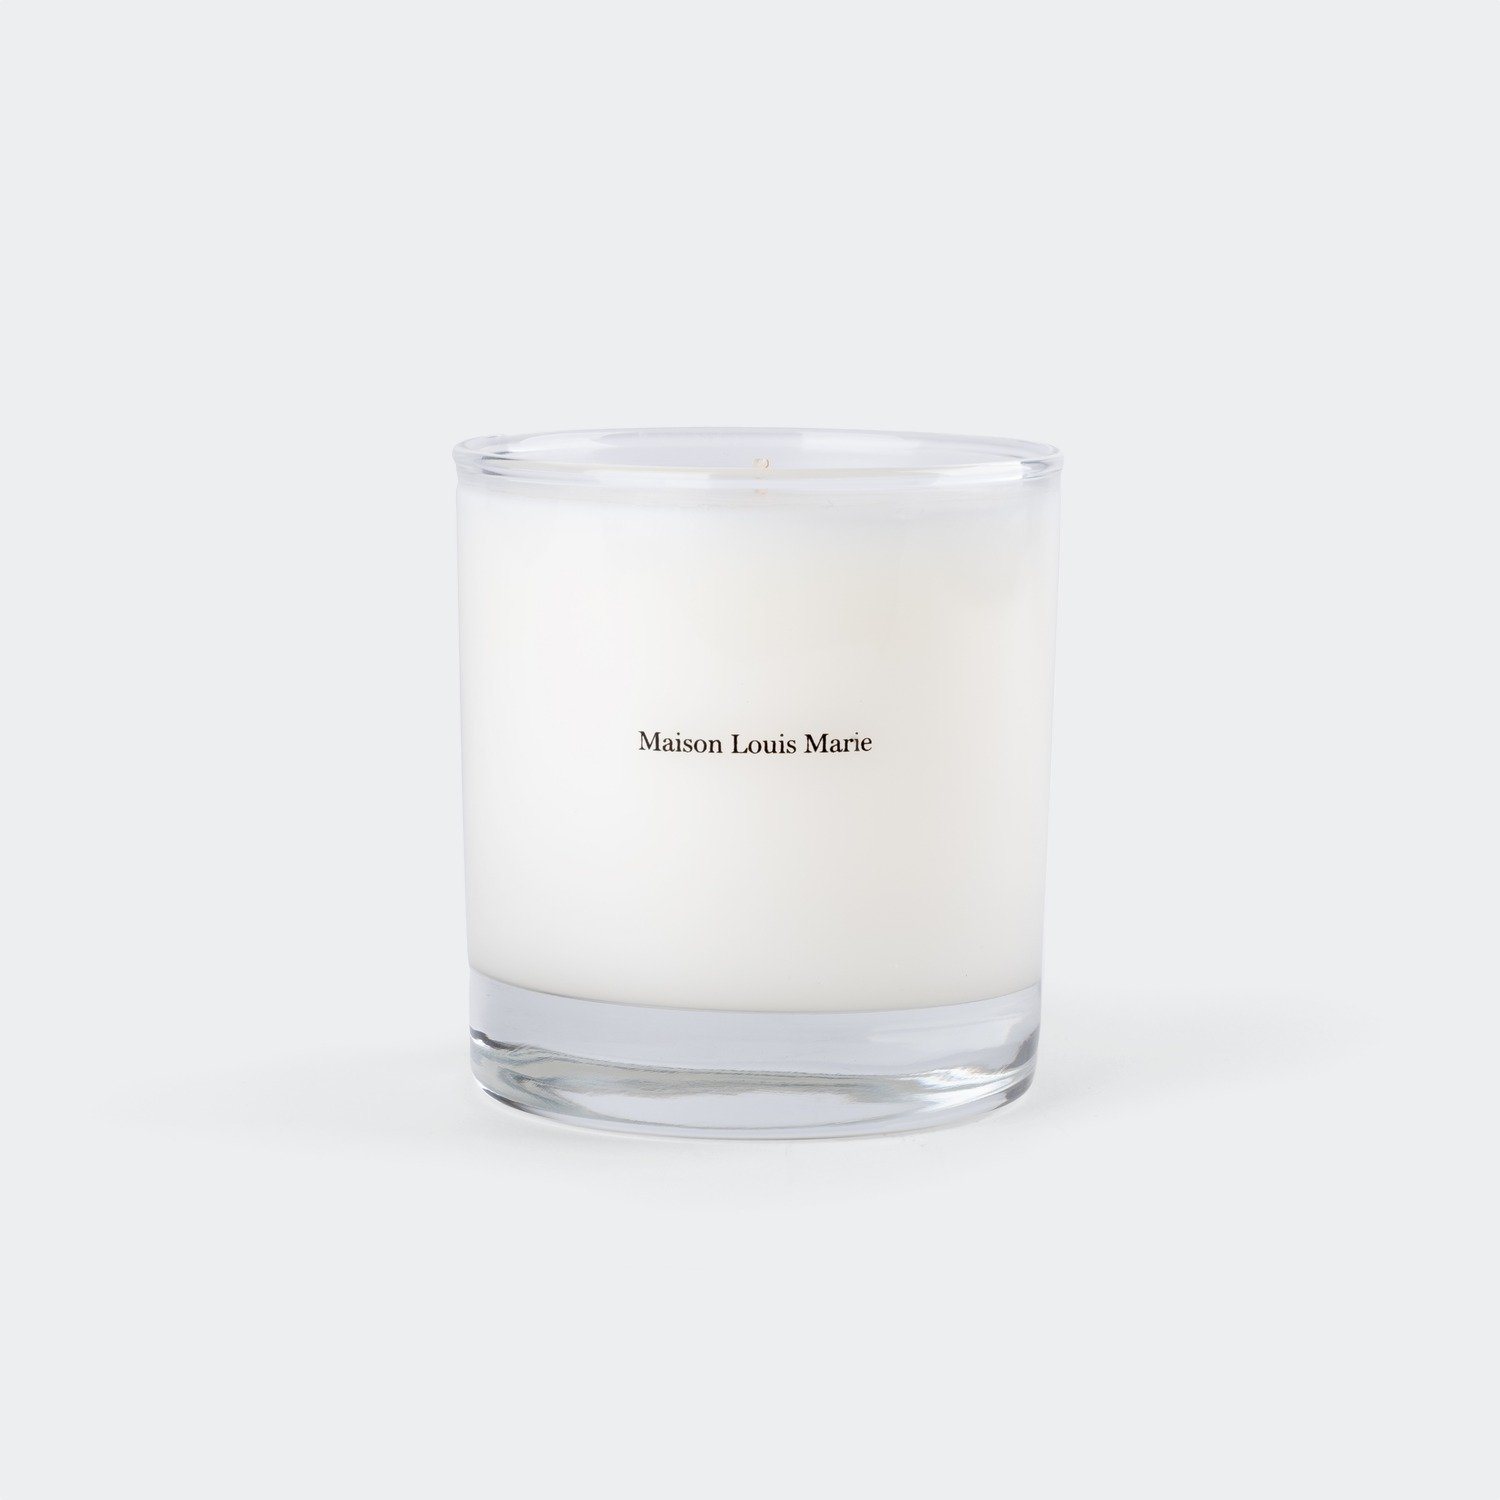 Maison Louis Marie Antidris Cassis Candle - KANSO